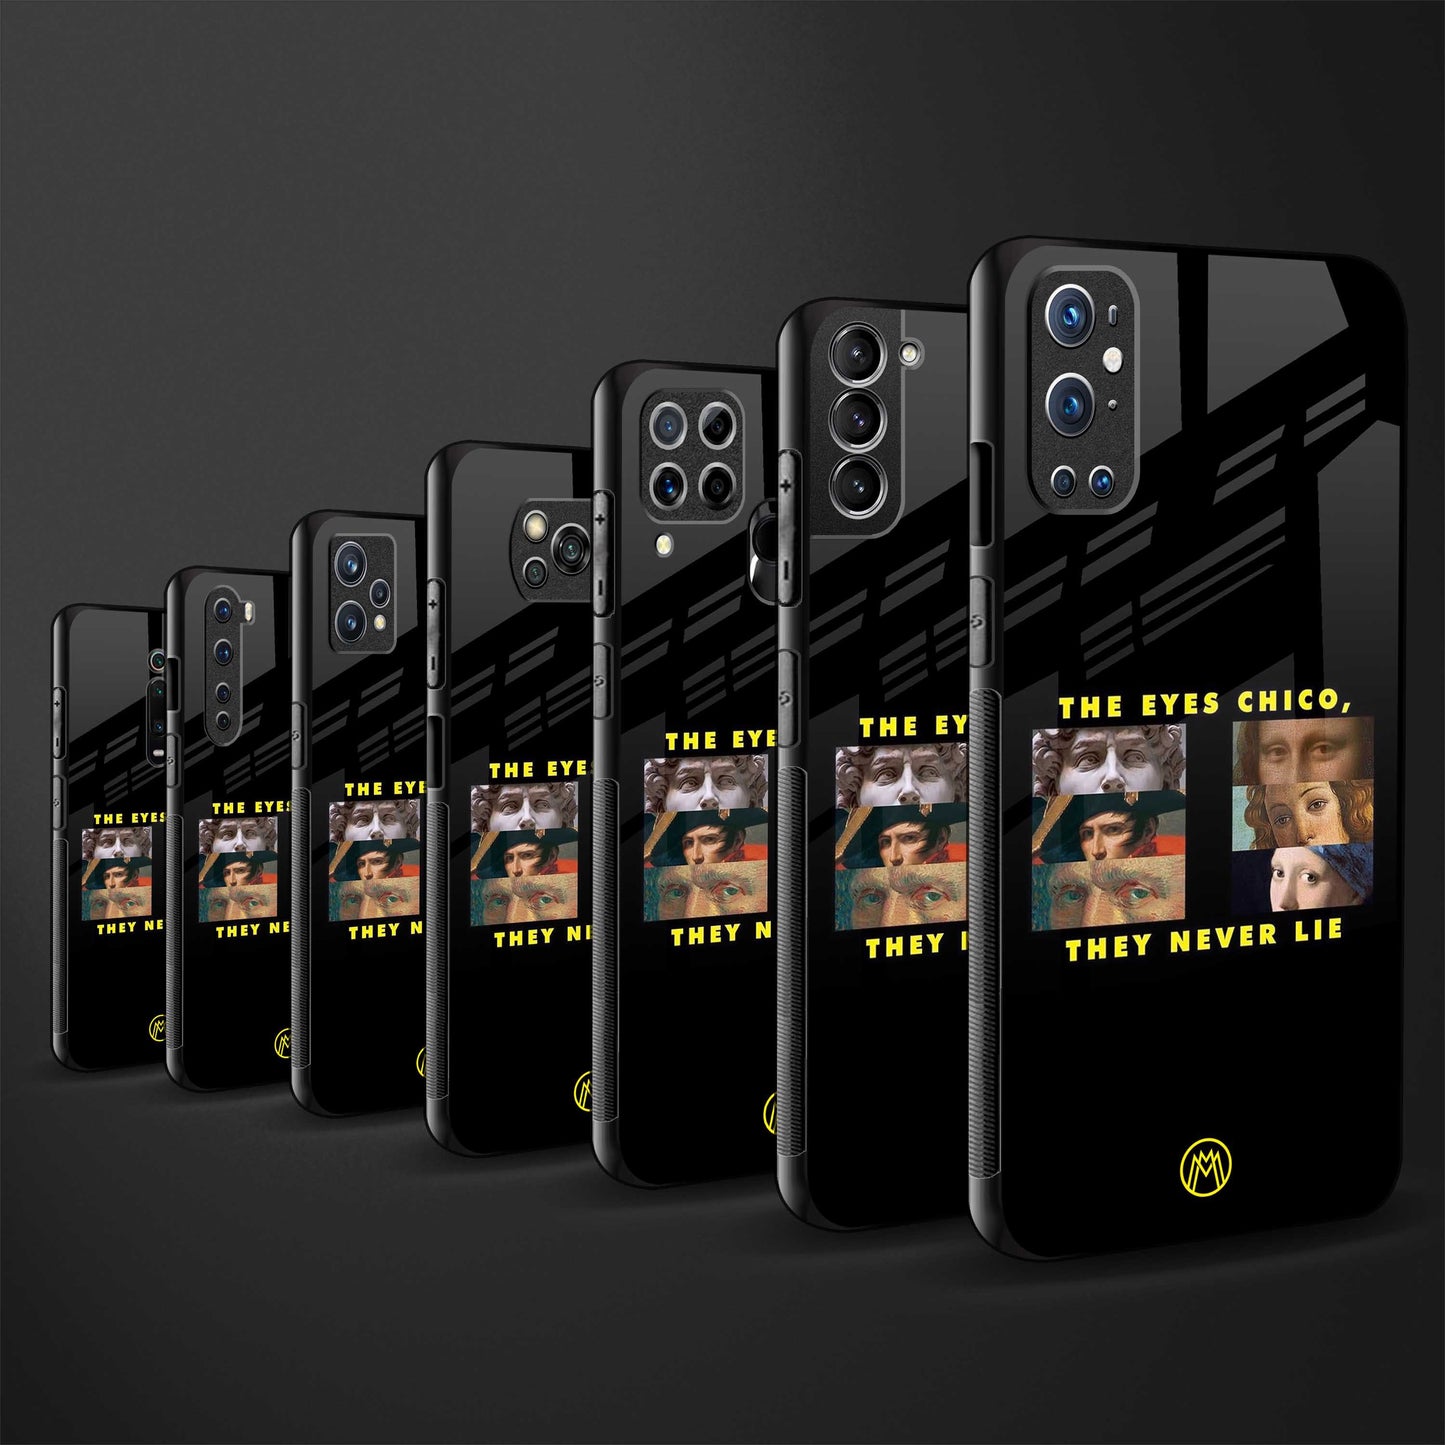 the eyes chico, they never lie movie quote glass case for iphone xs max image-3